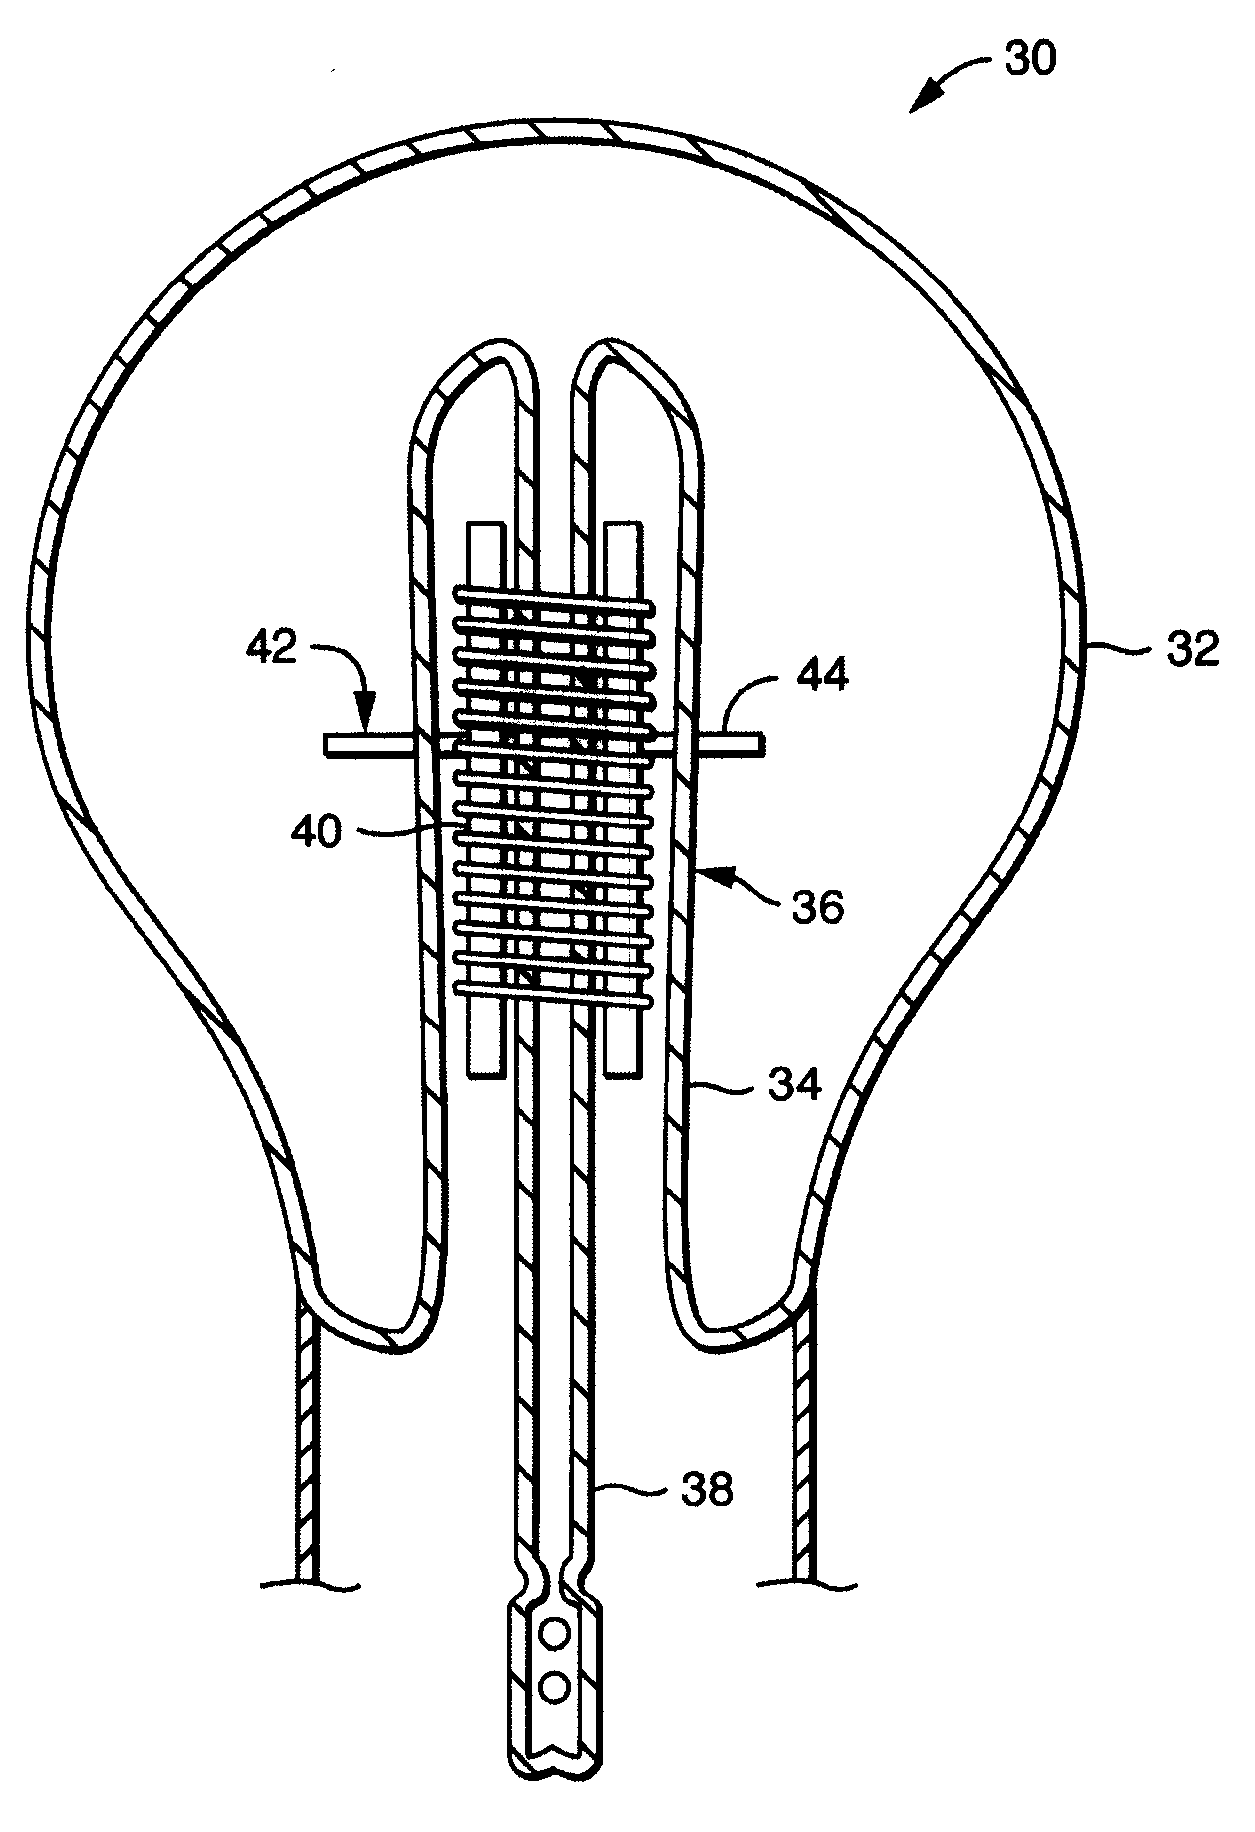 Amalgam support in an inductively coupled discharge lamp